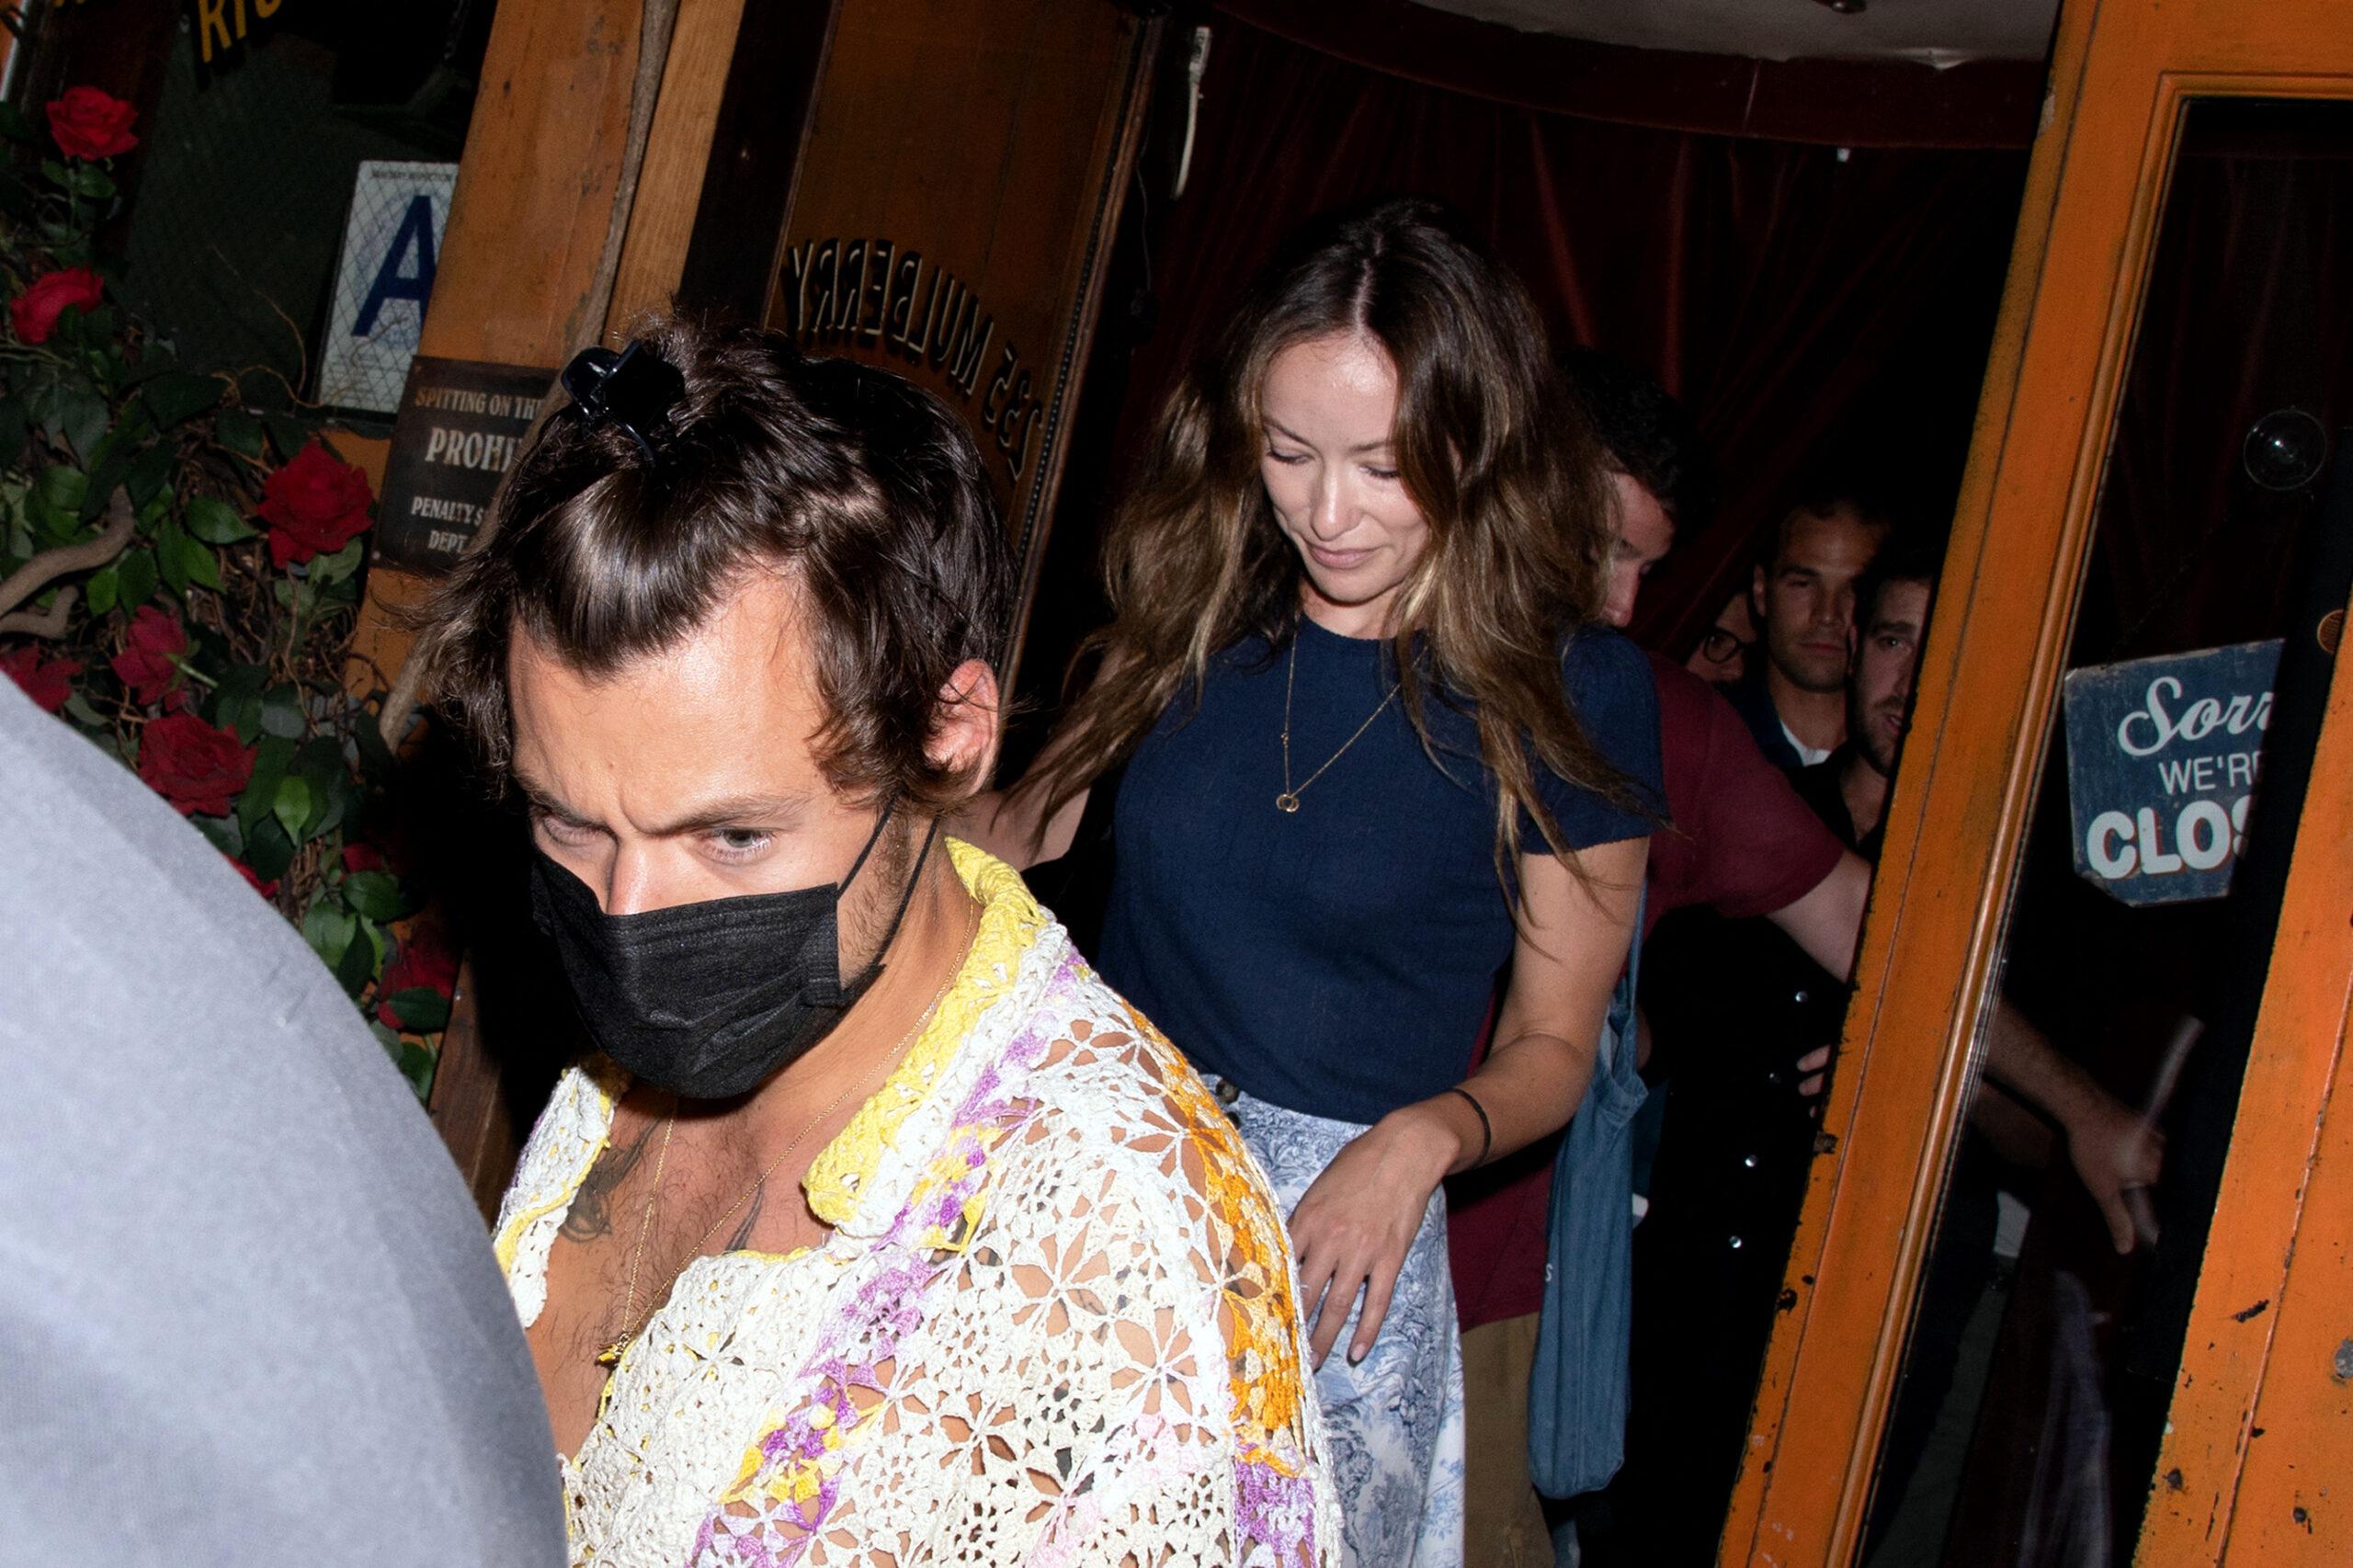 Harry Styles and Olivia Wilde Exit Rubirosa Restaurant in NYC